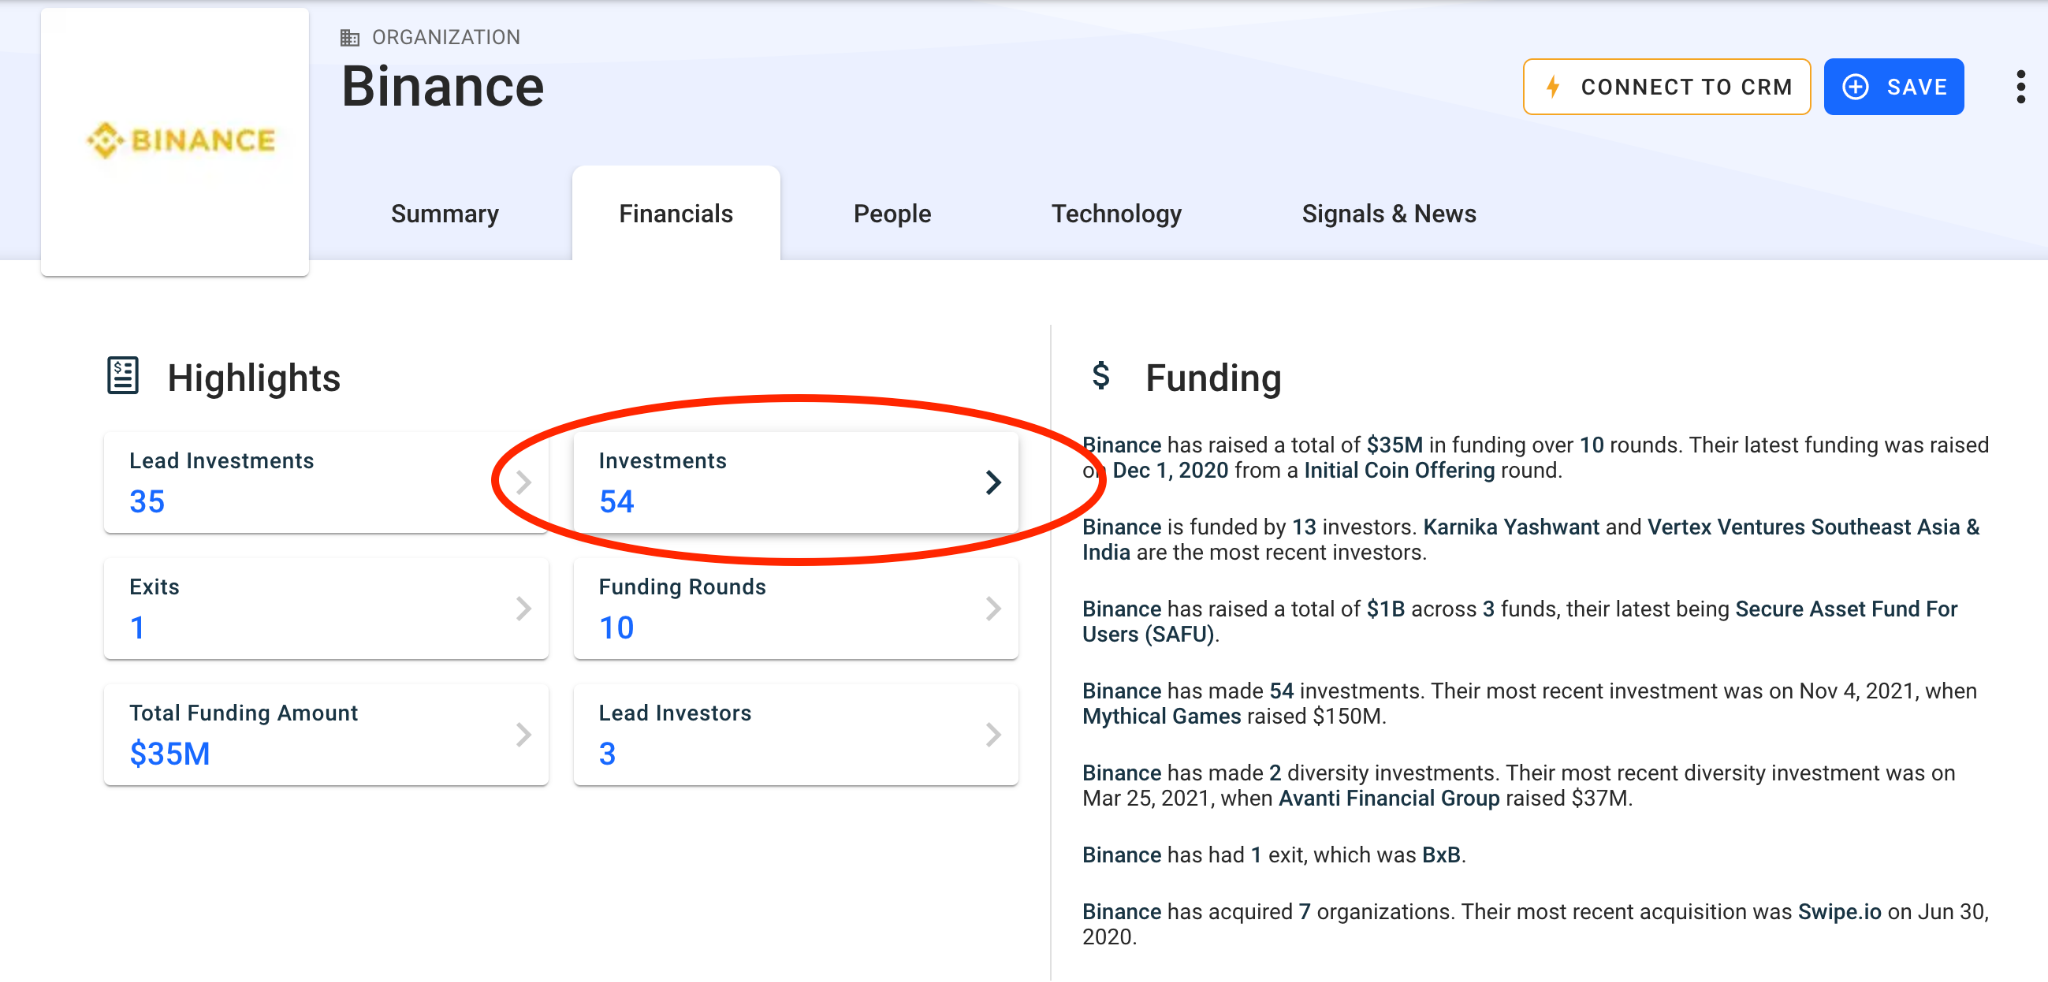 Quick guide on getting insights through Crunchbase - click on the “Investments” tab to see some of the latest investments Binance has made in cryptocurrency projects